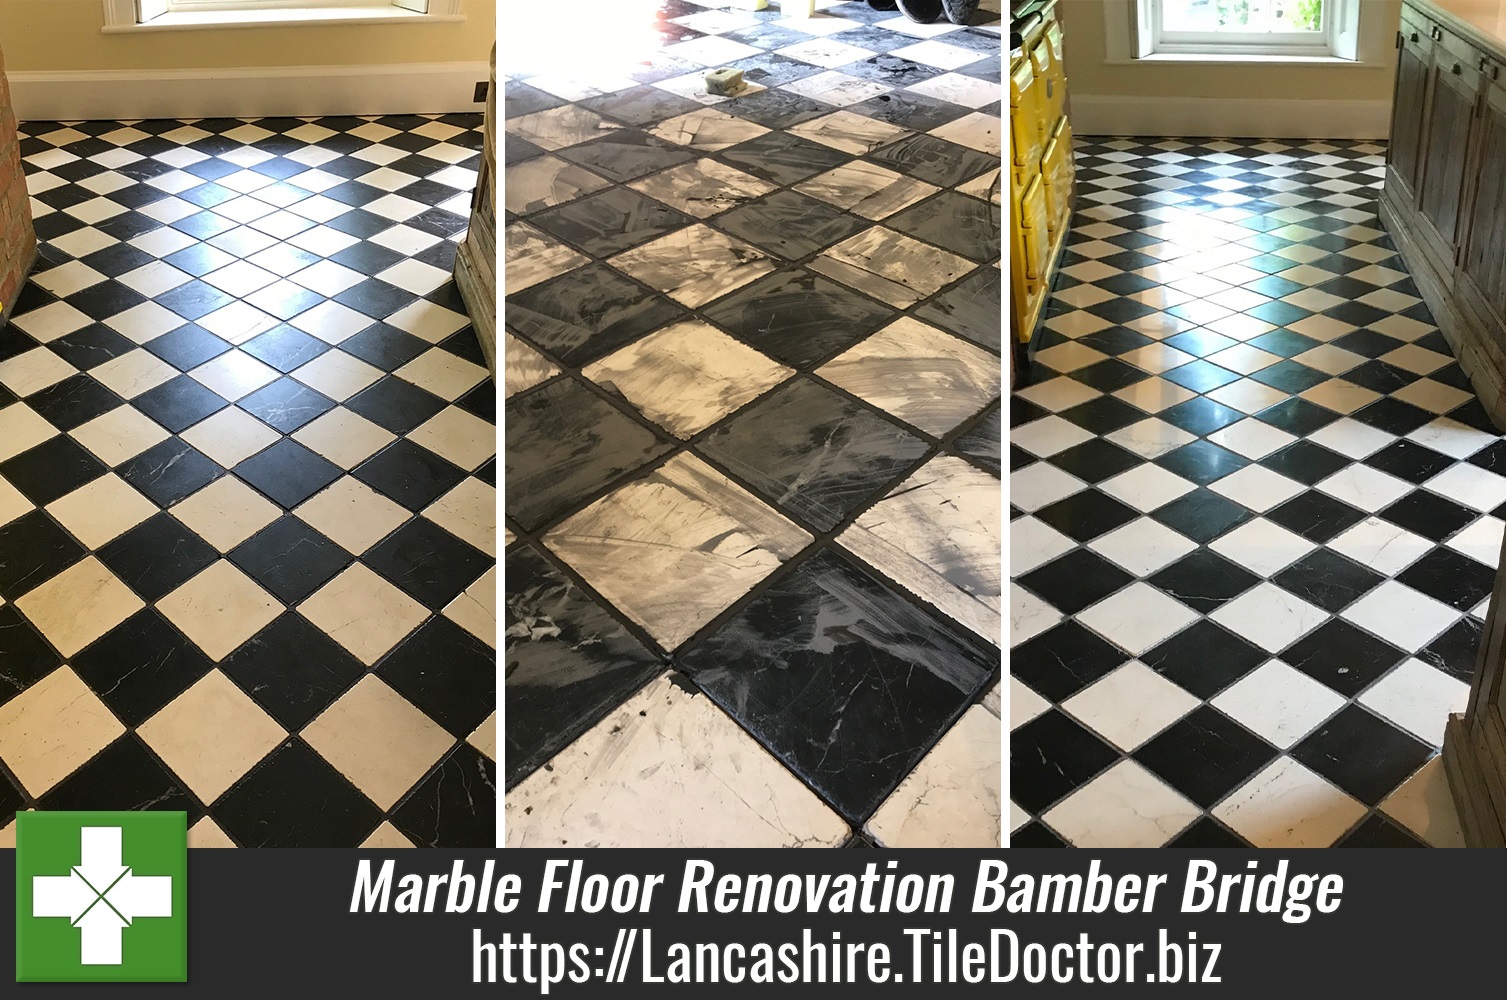 Classic Black and White Marble Floor Renovated in Bamber Bridge